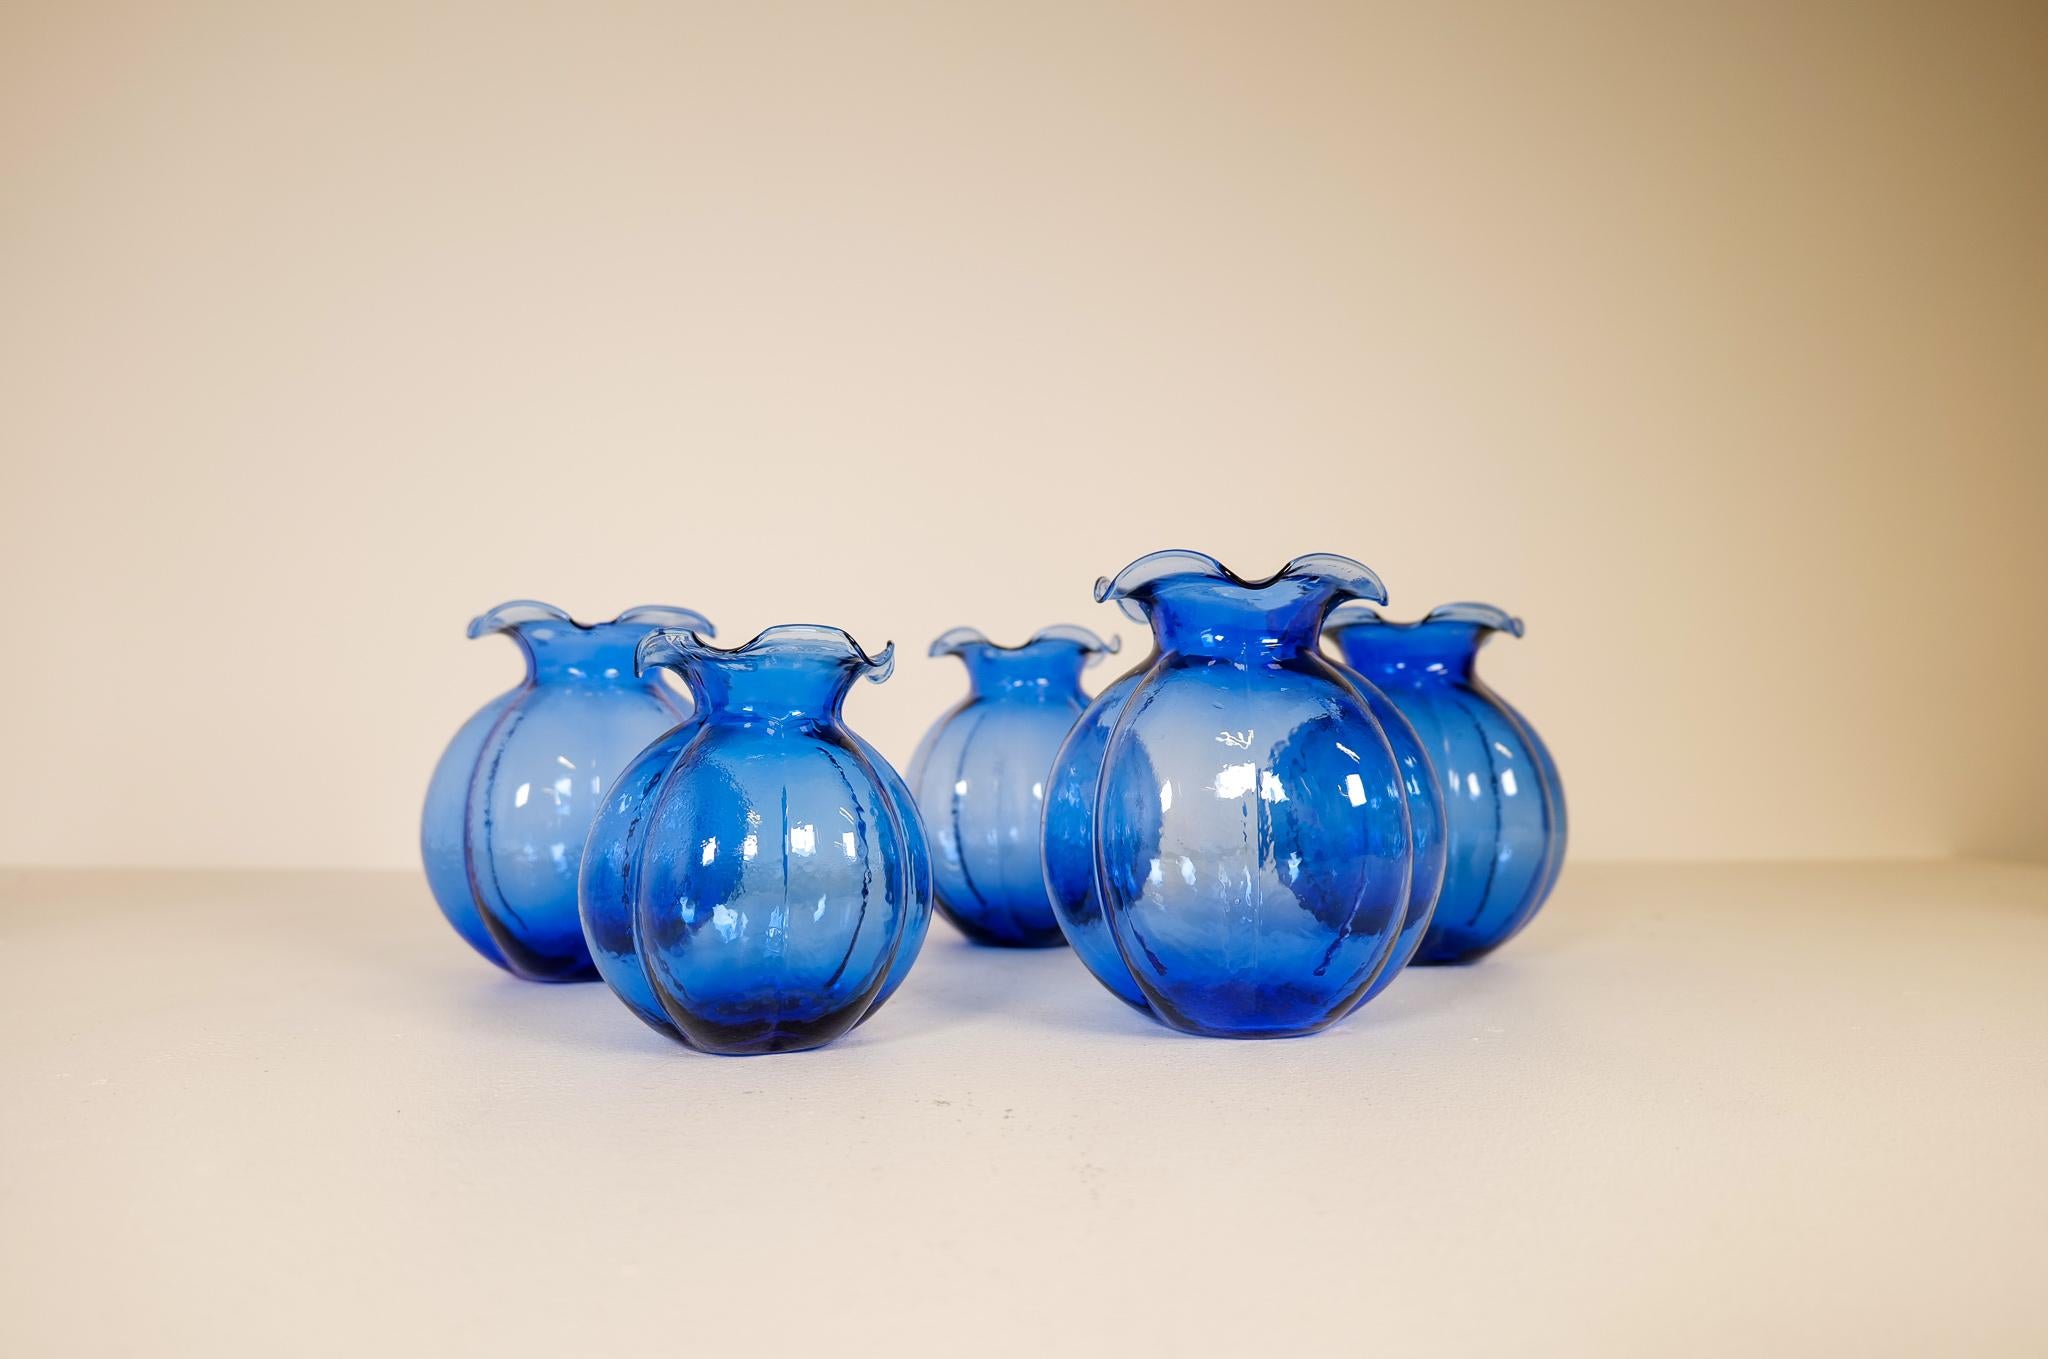 Wonderful shaped vases with a nice blue color are these 5 vases. They are made in Johansfors glass factory Sweden in the 1950s. 

Good condition.

Measures: 4 big one’s H 20 cm D 15 cm 1 smaller H 16 D 14.
 